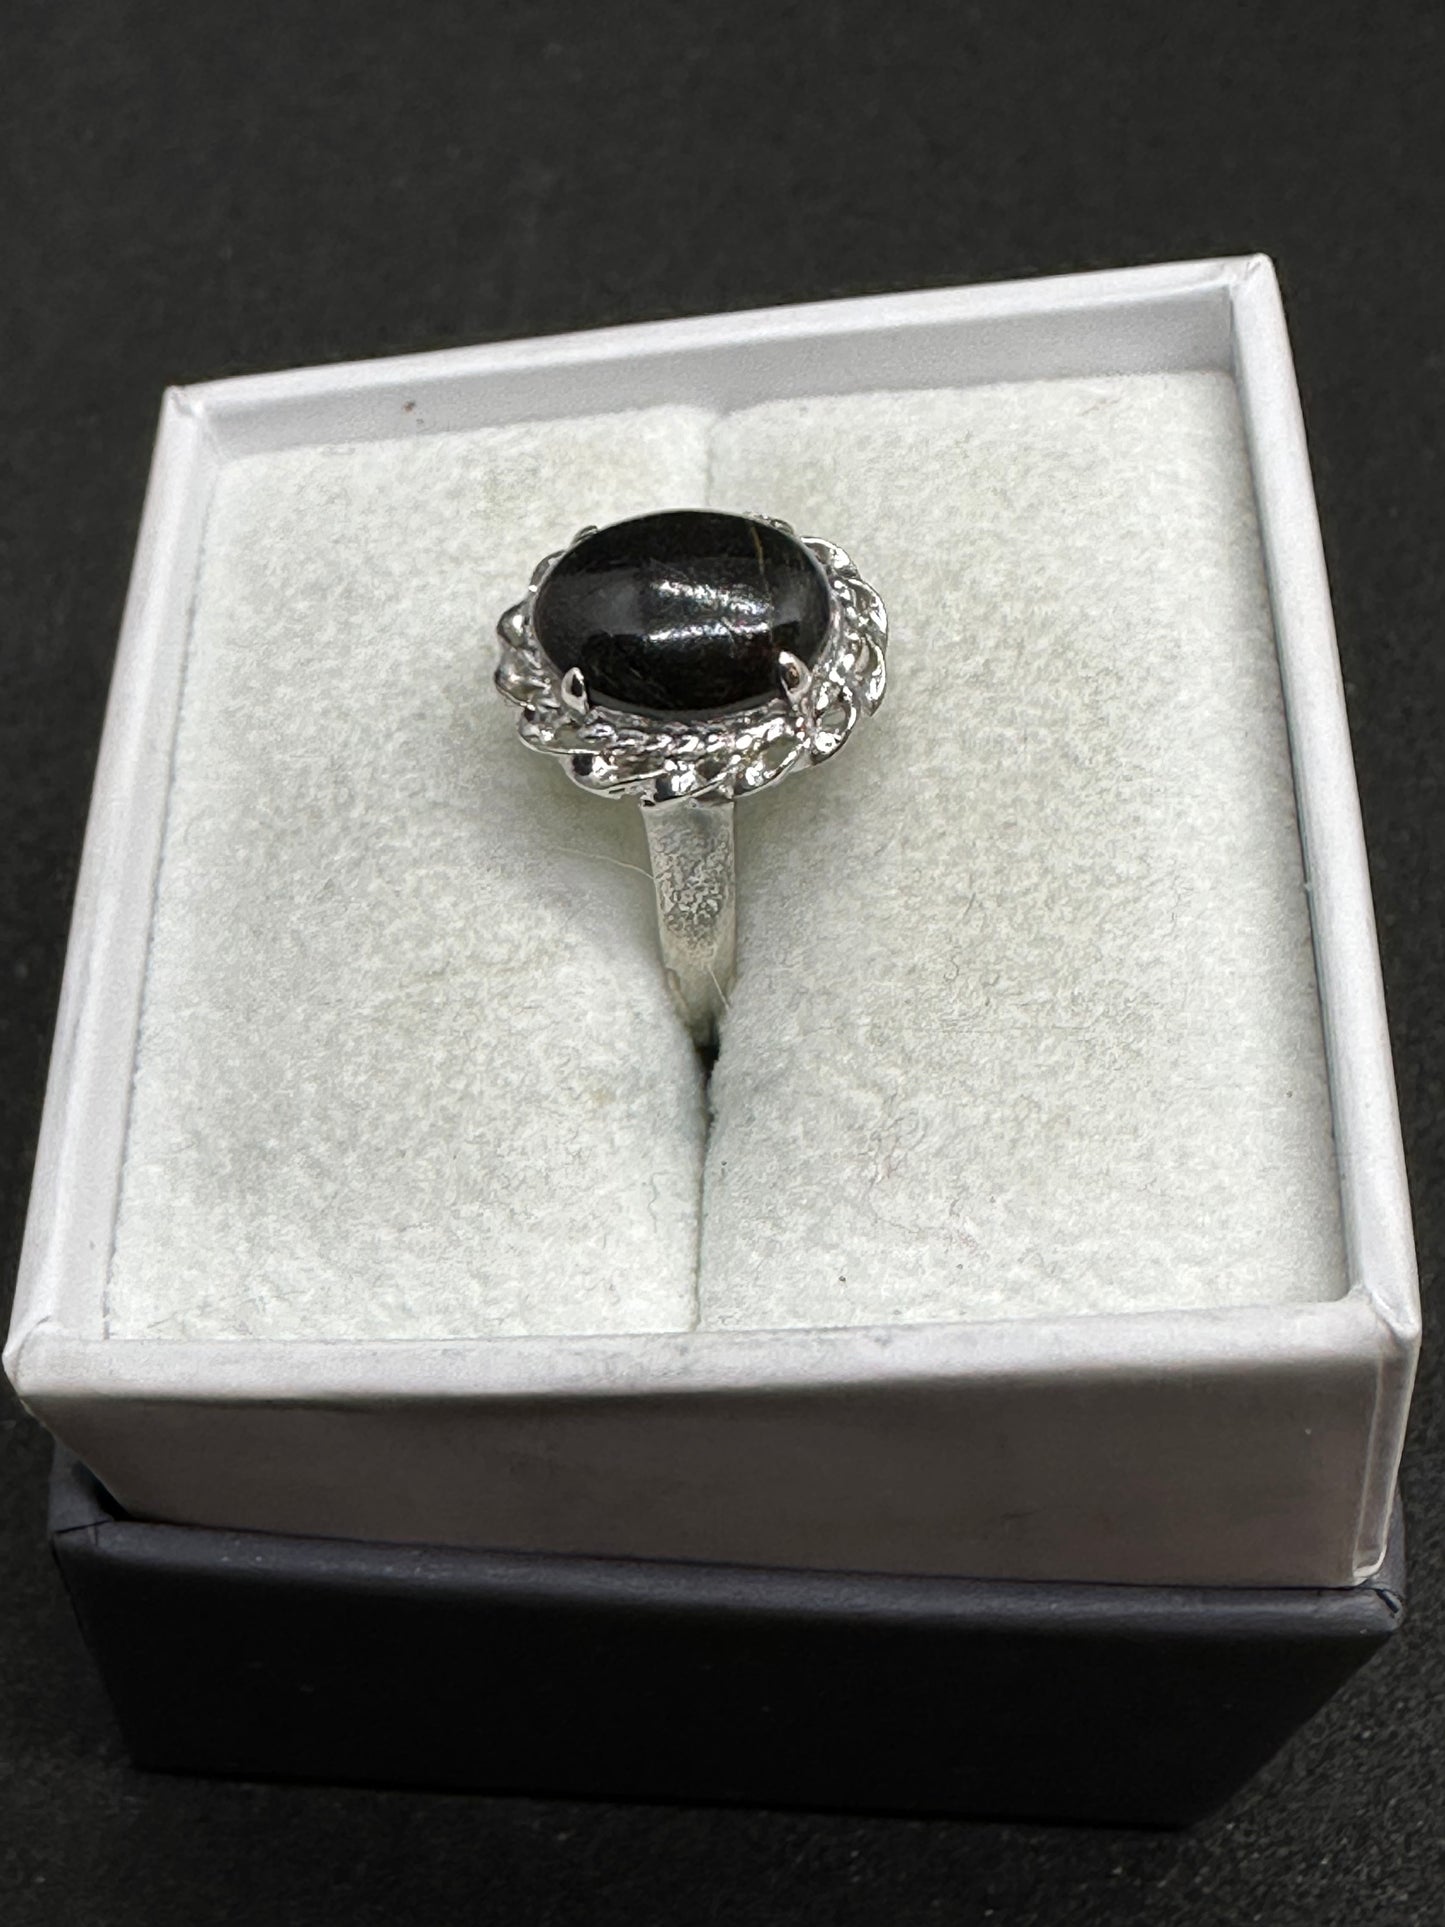 Vintage Art Deco Sterling Silver .925 Black Onyx Twisted Surround Ring Size 7.25